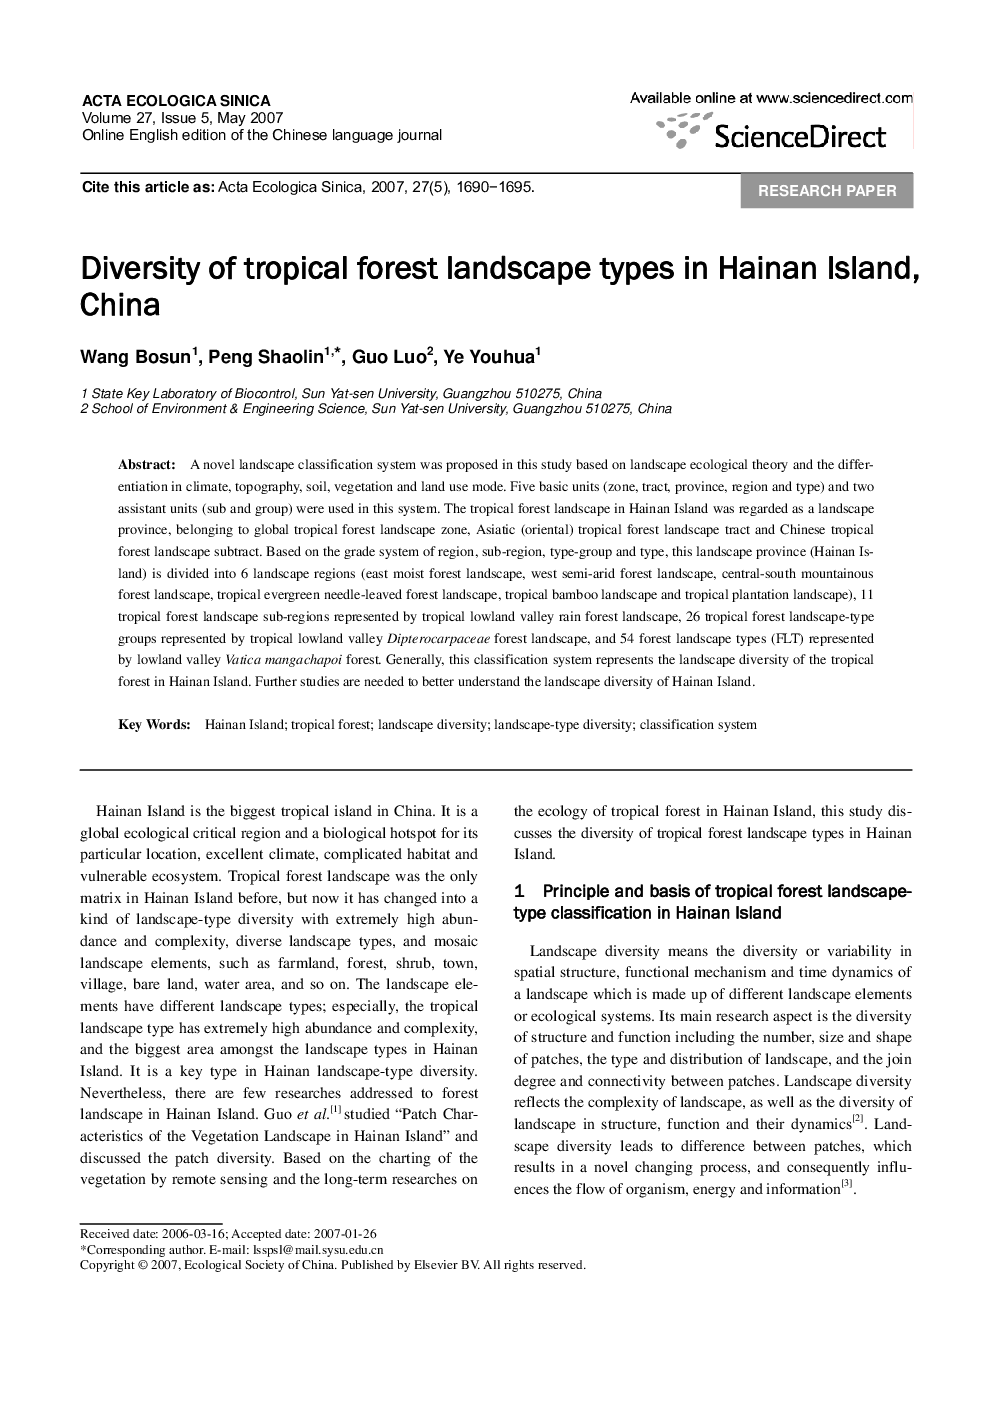 Diversity of tropical forest landscape types in Hainan Island, China